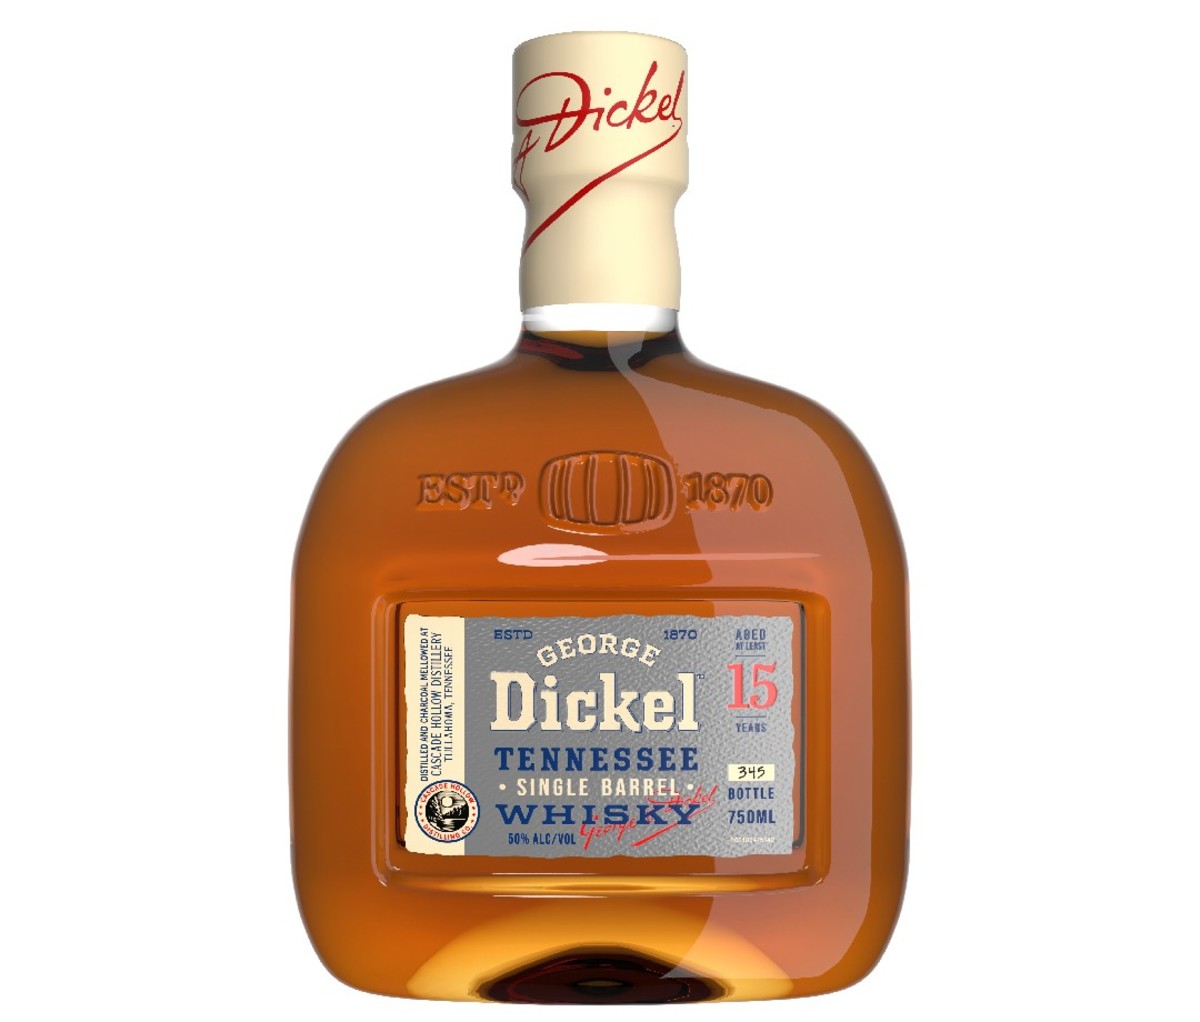 A bottle of George Dickel 15-Year-Old Single Barrel bourbon. It's available in 20 states.